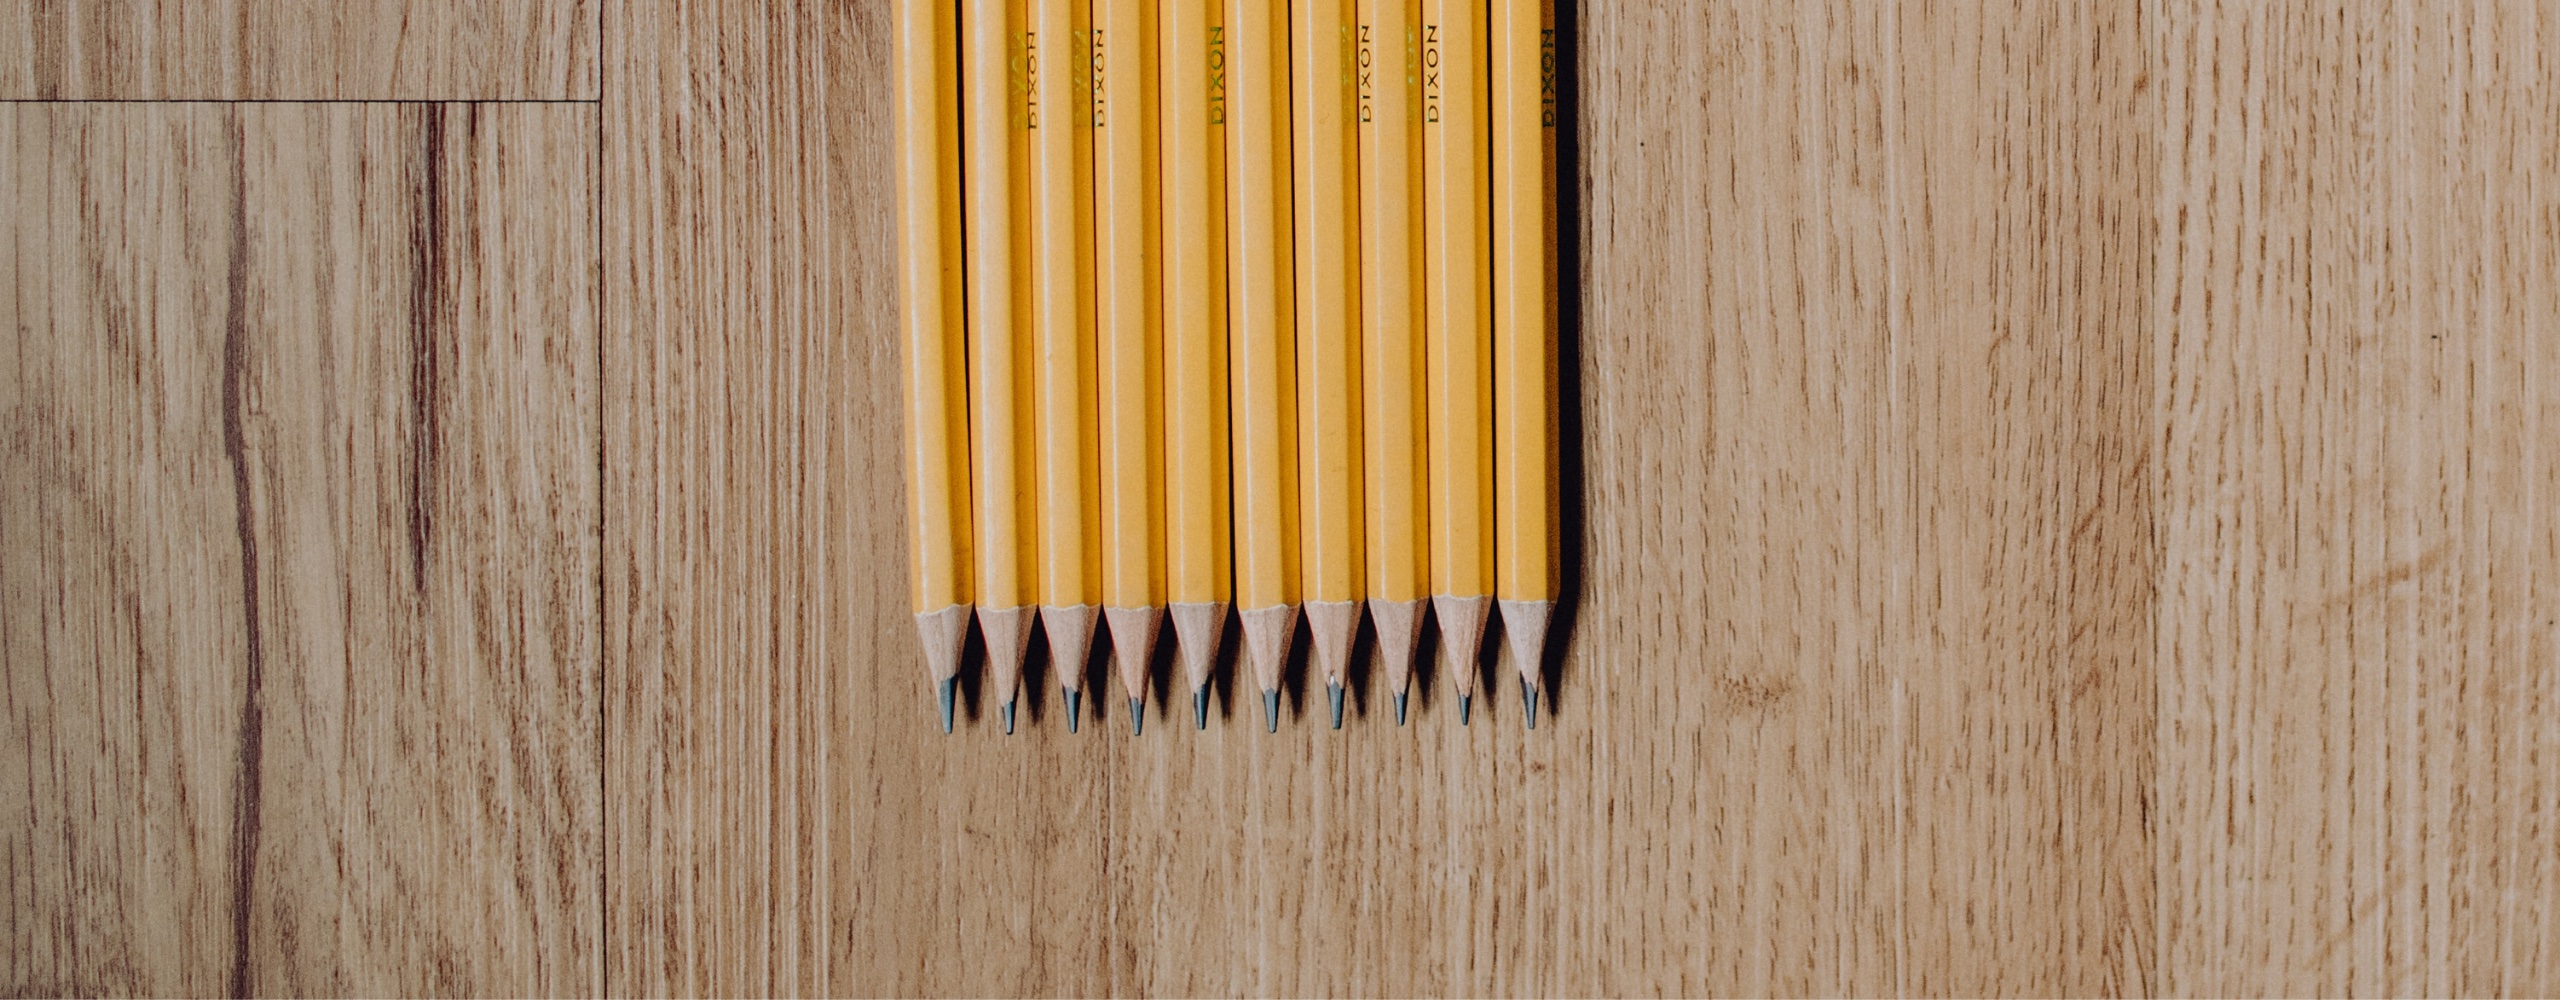 centered pencils in a line